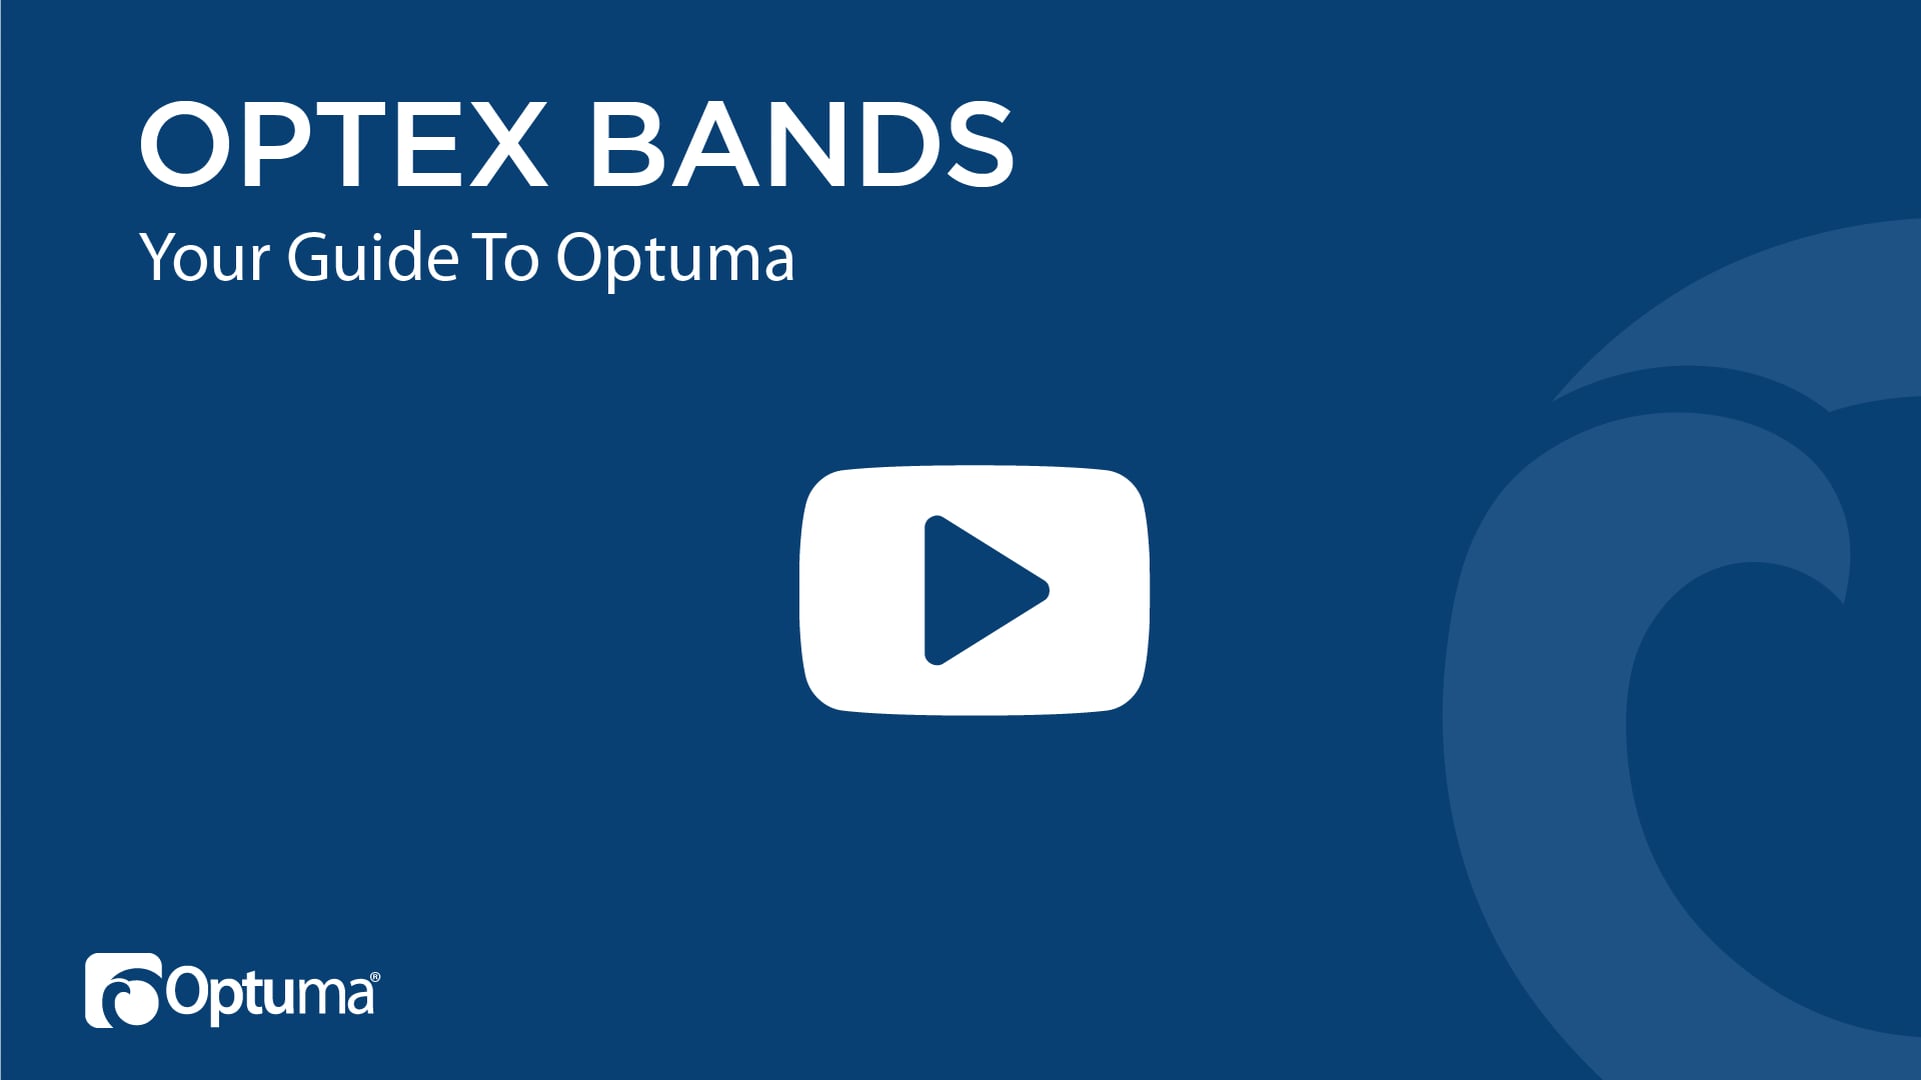 Introduction to Optex Bands